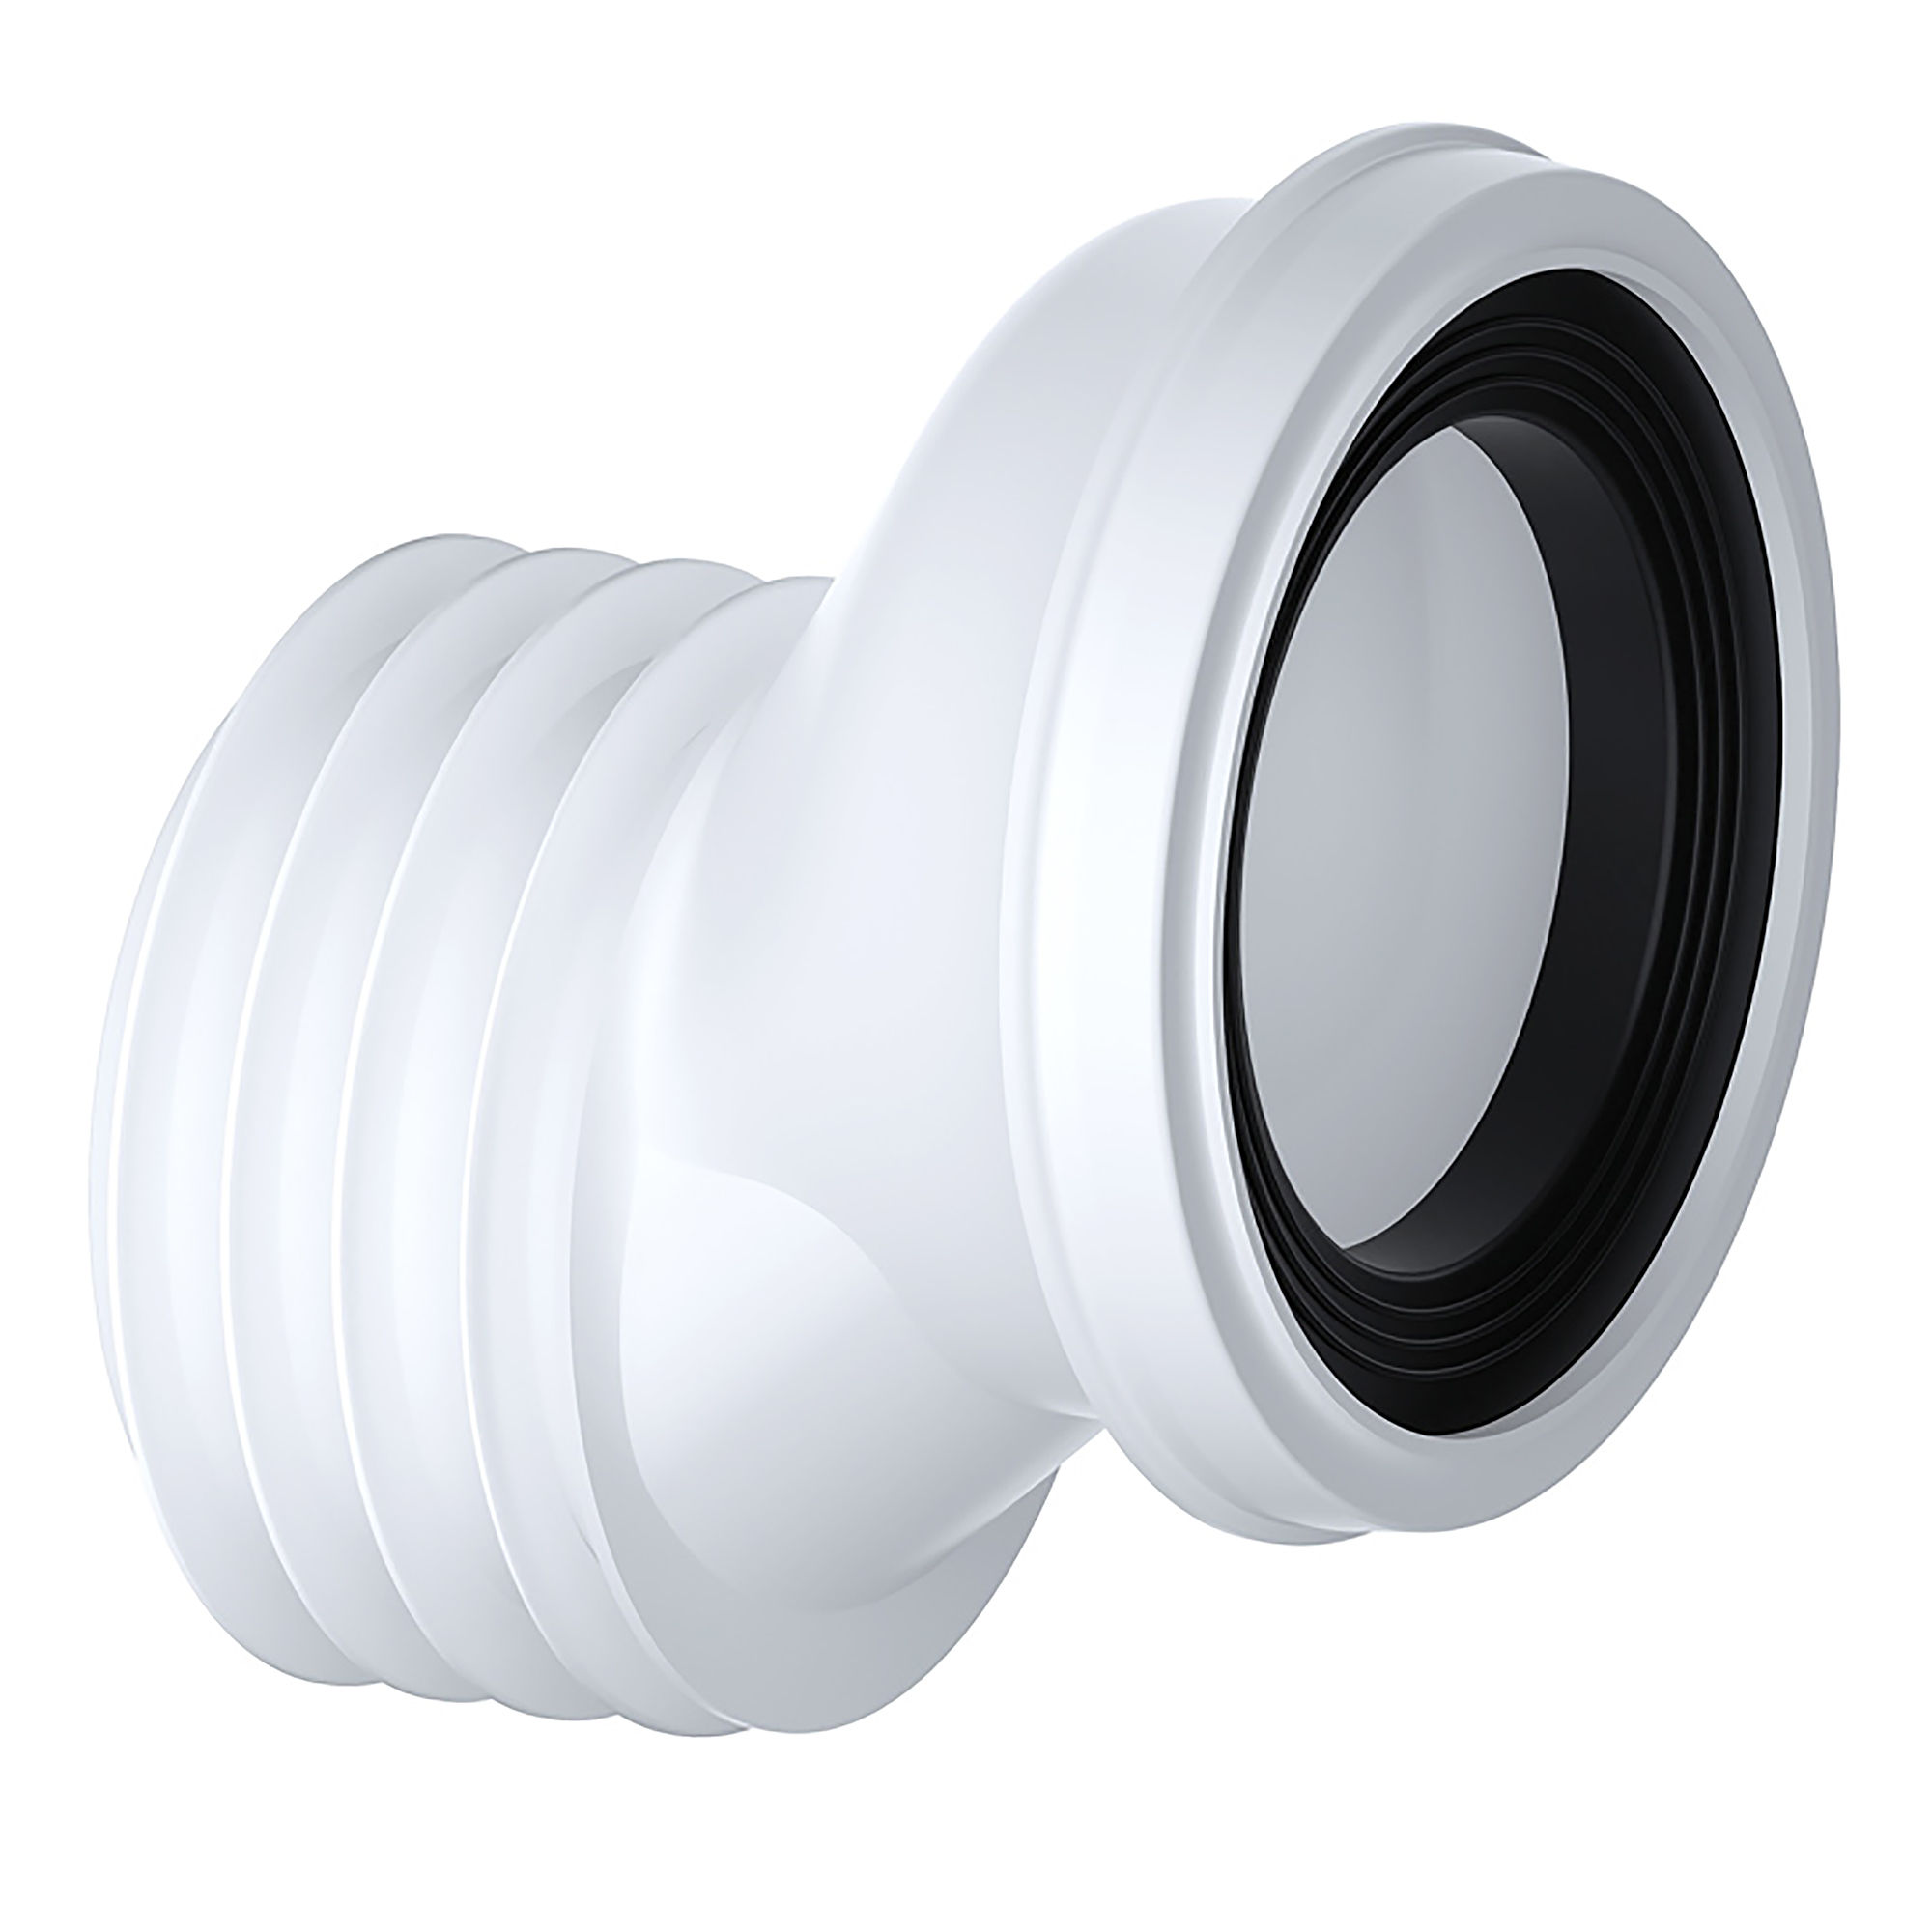 Viva Offset WC Toilet Pan Connector 40mm - PP0003/A